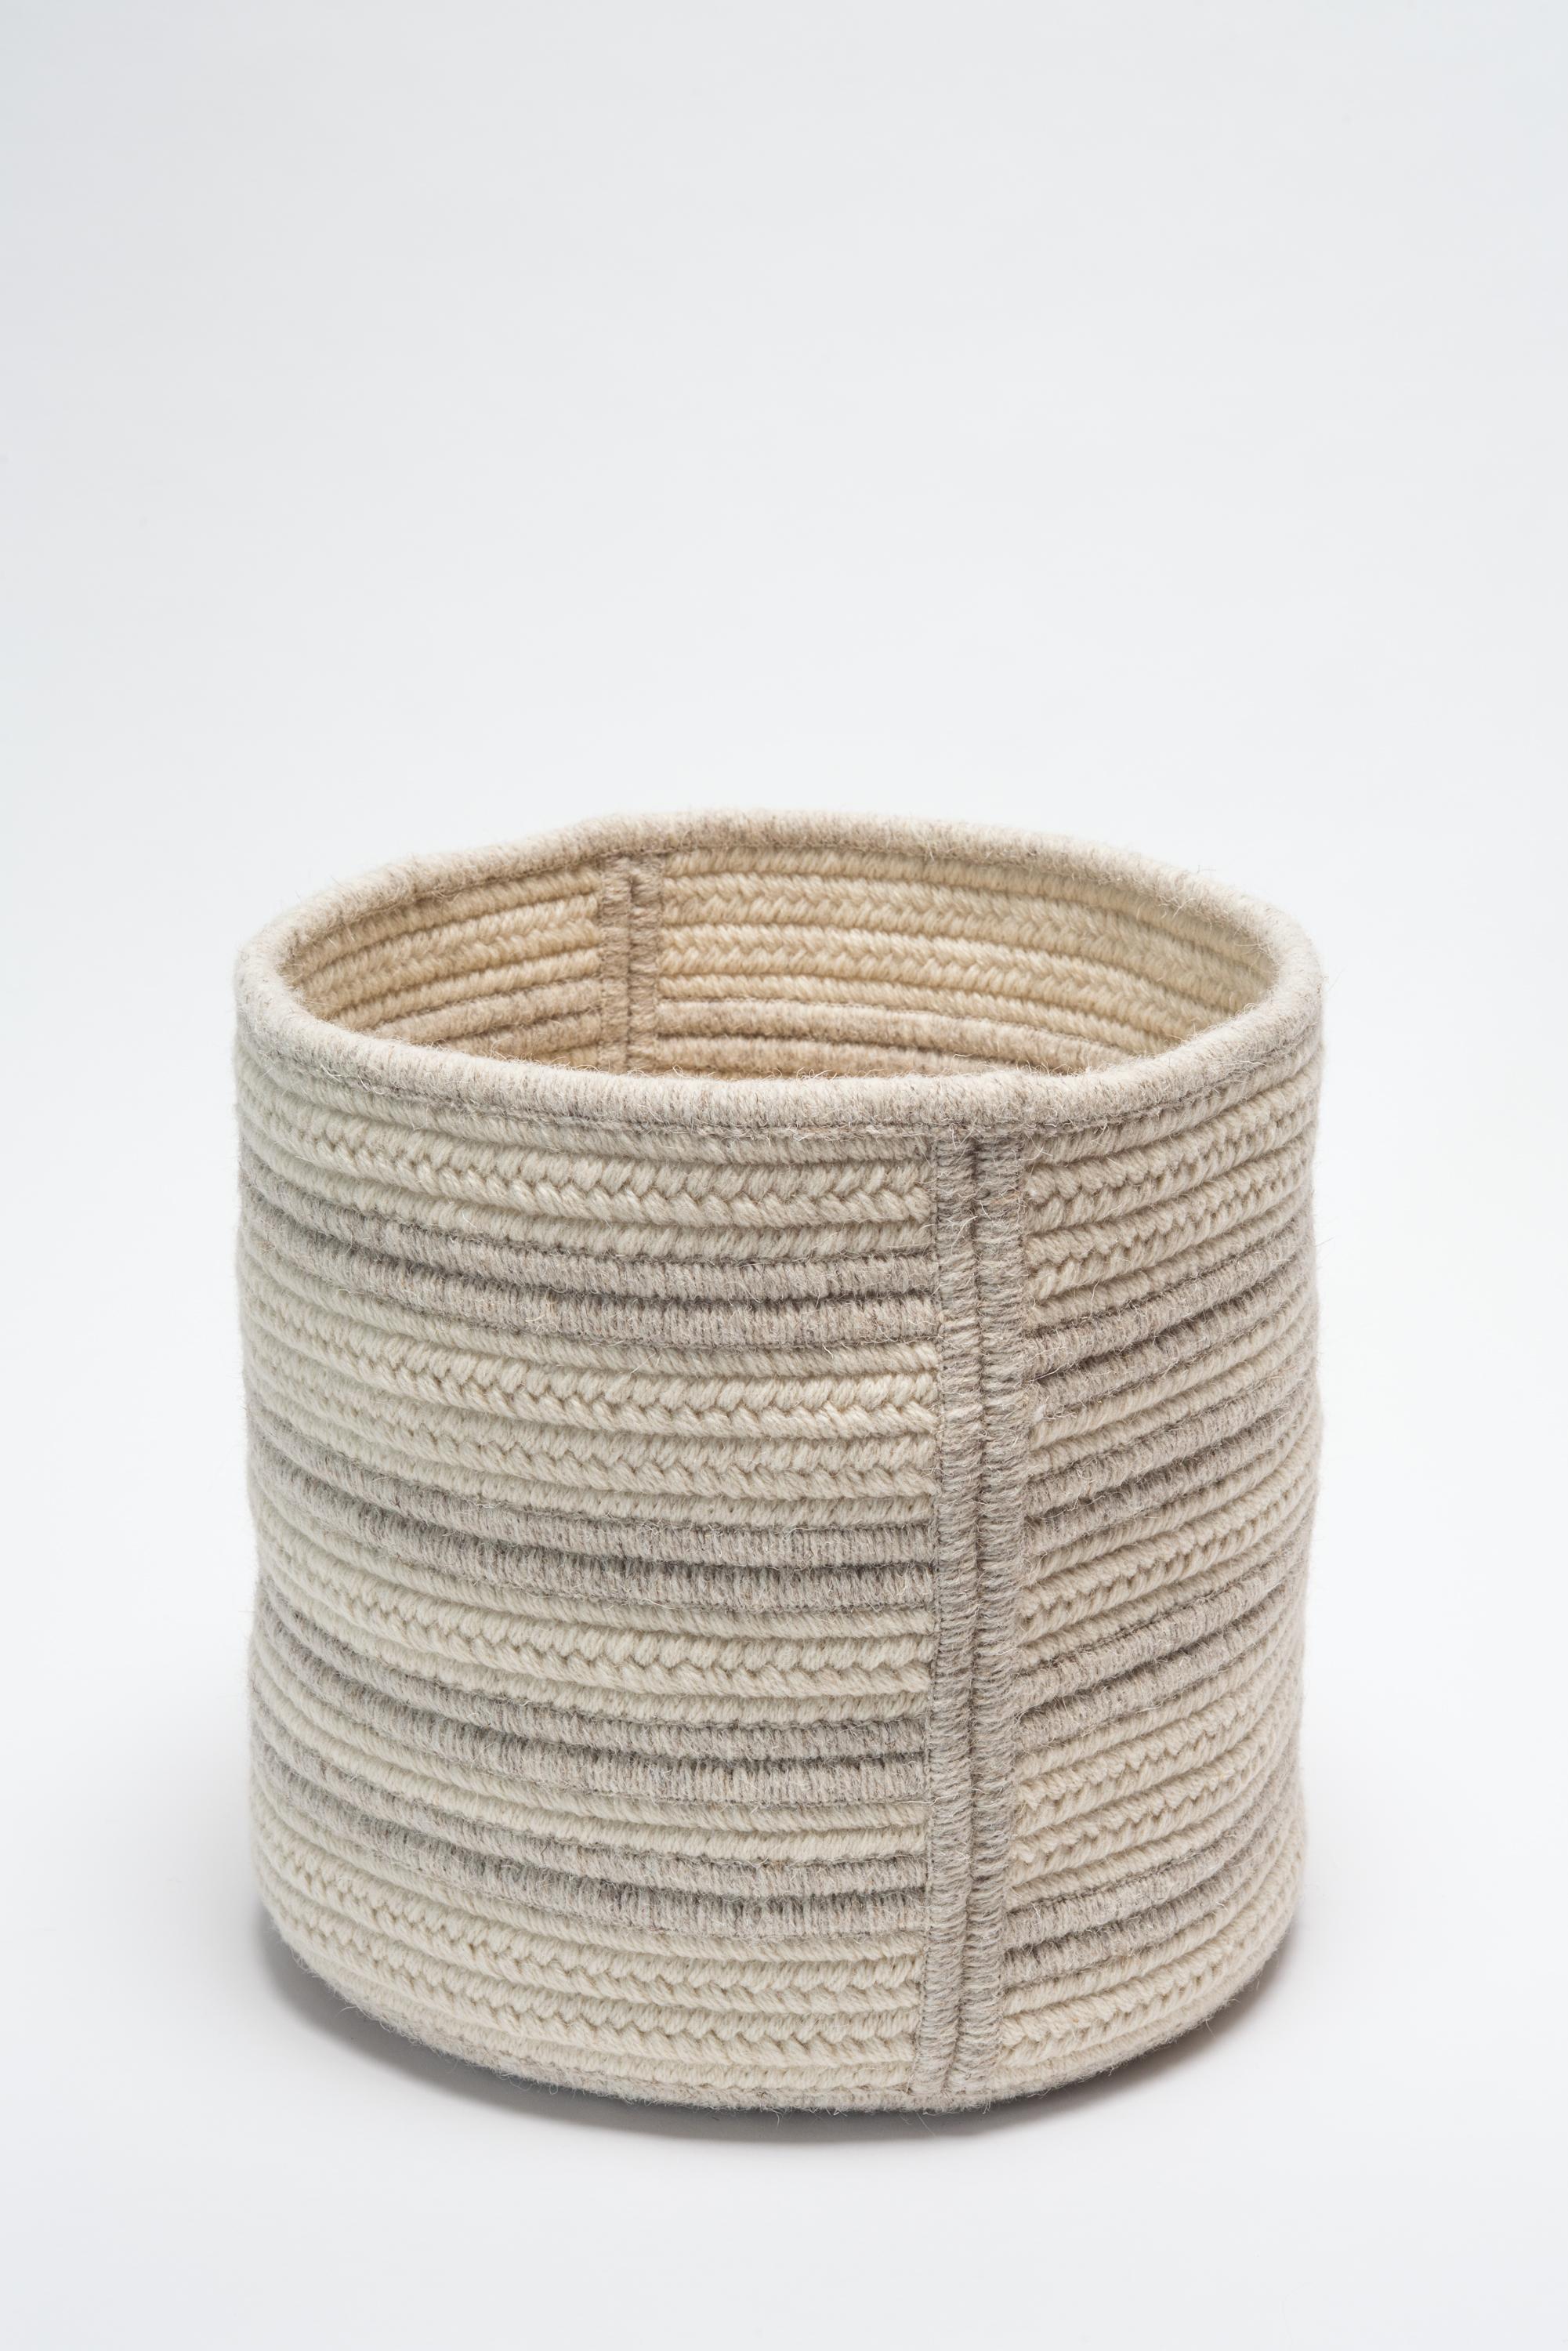 Contemporary Natural Woven Wool Basket in Dark Grey, Custom Crafted in the USA, Raised Line  For Sale